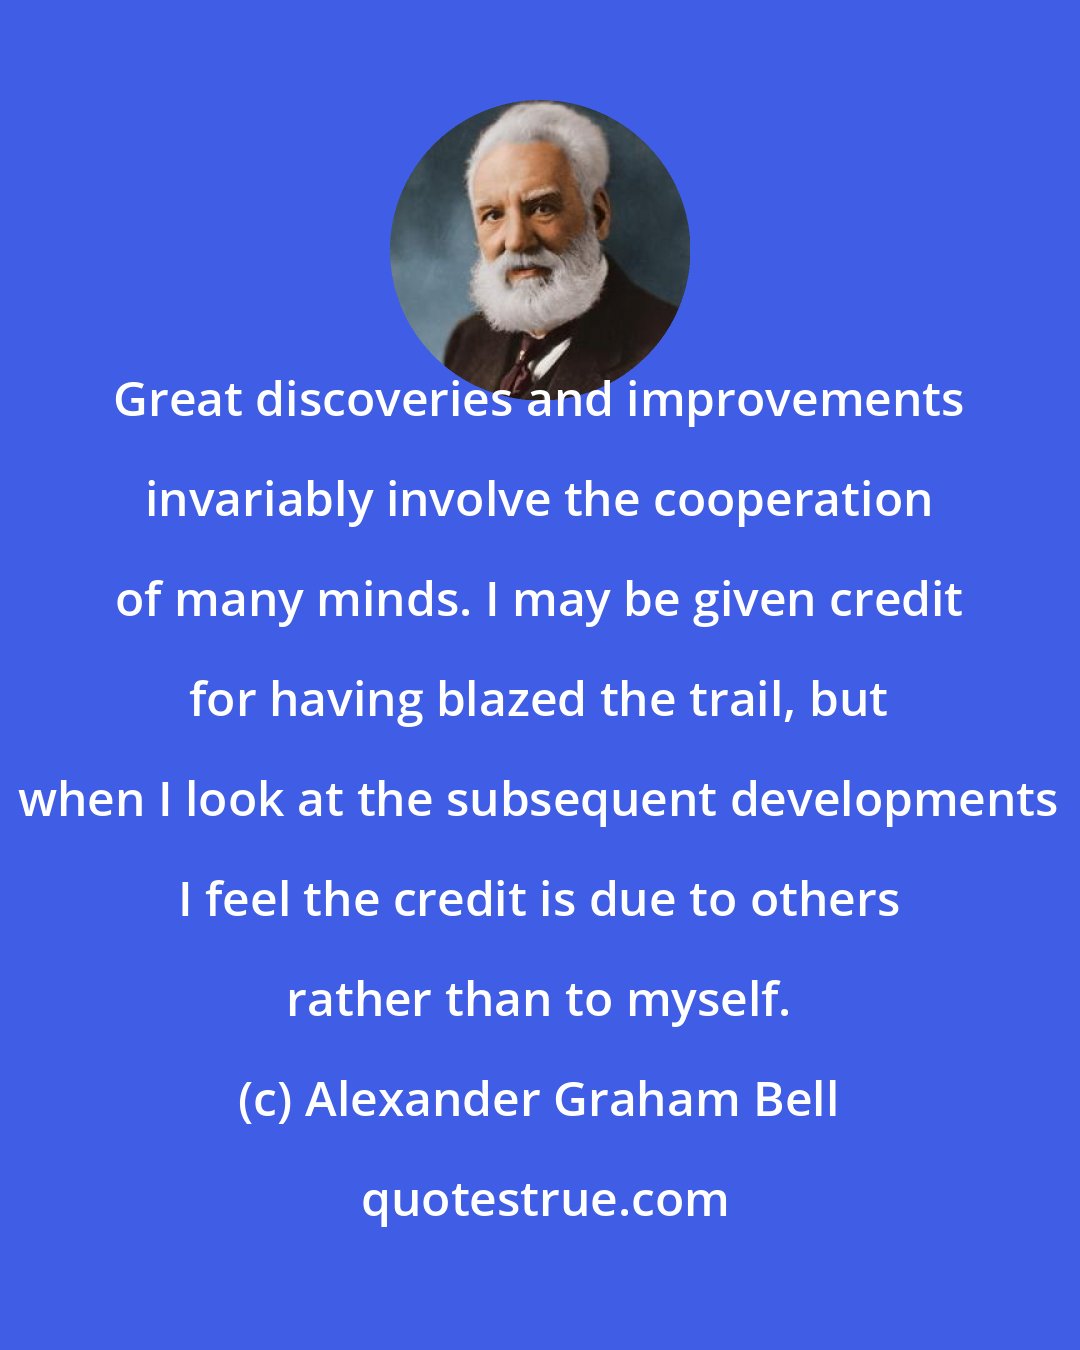 Alexander Graham Bell: Great discoveries and improvements invariably involve the cooperation of many minds. I may be given credit for having blazed the trail, but when I look at the subsequent developments I feel the credit is due to others rather than to myself.